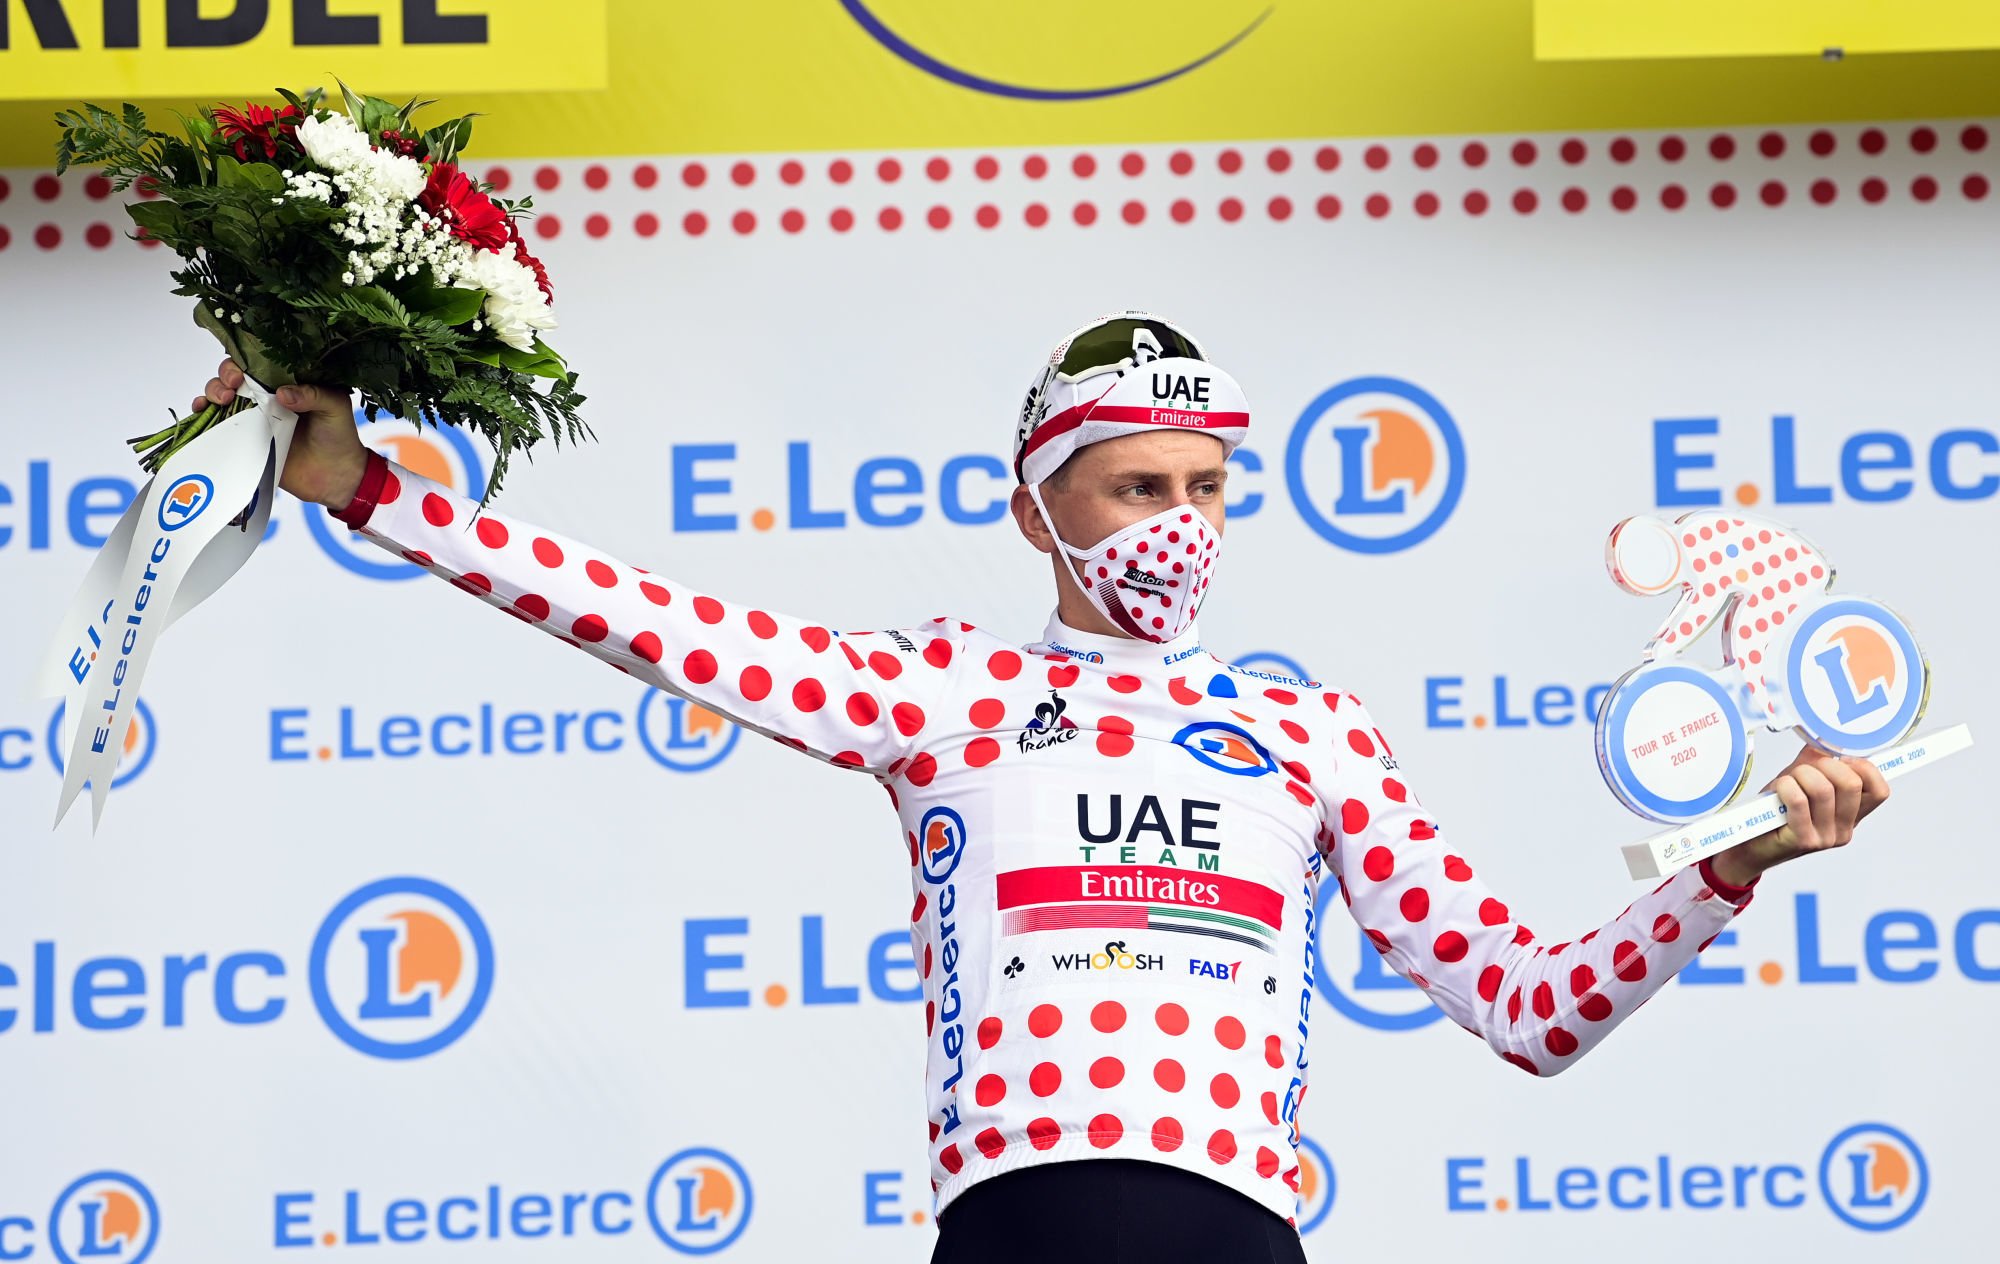 Tadej Pogacar of UAE Team Emirates celebrates in the red polka-dot jersey for best climber after stage 17 of the 107th edition of the Tour de France cycling race from Grenoble to Meribel Col de la Loze (170 km), in France, Wednesday 16 September 2020. This year's Tour de France was postponed due to the worldwide Covid-19 pandemic. The 2020 race starts in Nice on Saturday 29 August and ends on 20 September. BELGA PHOTO POOL 

Photo by Icon Sport